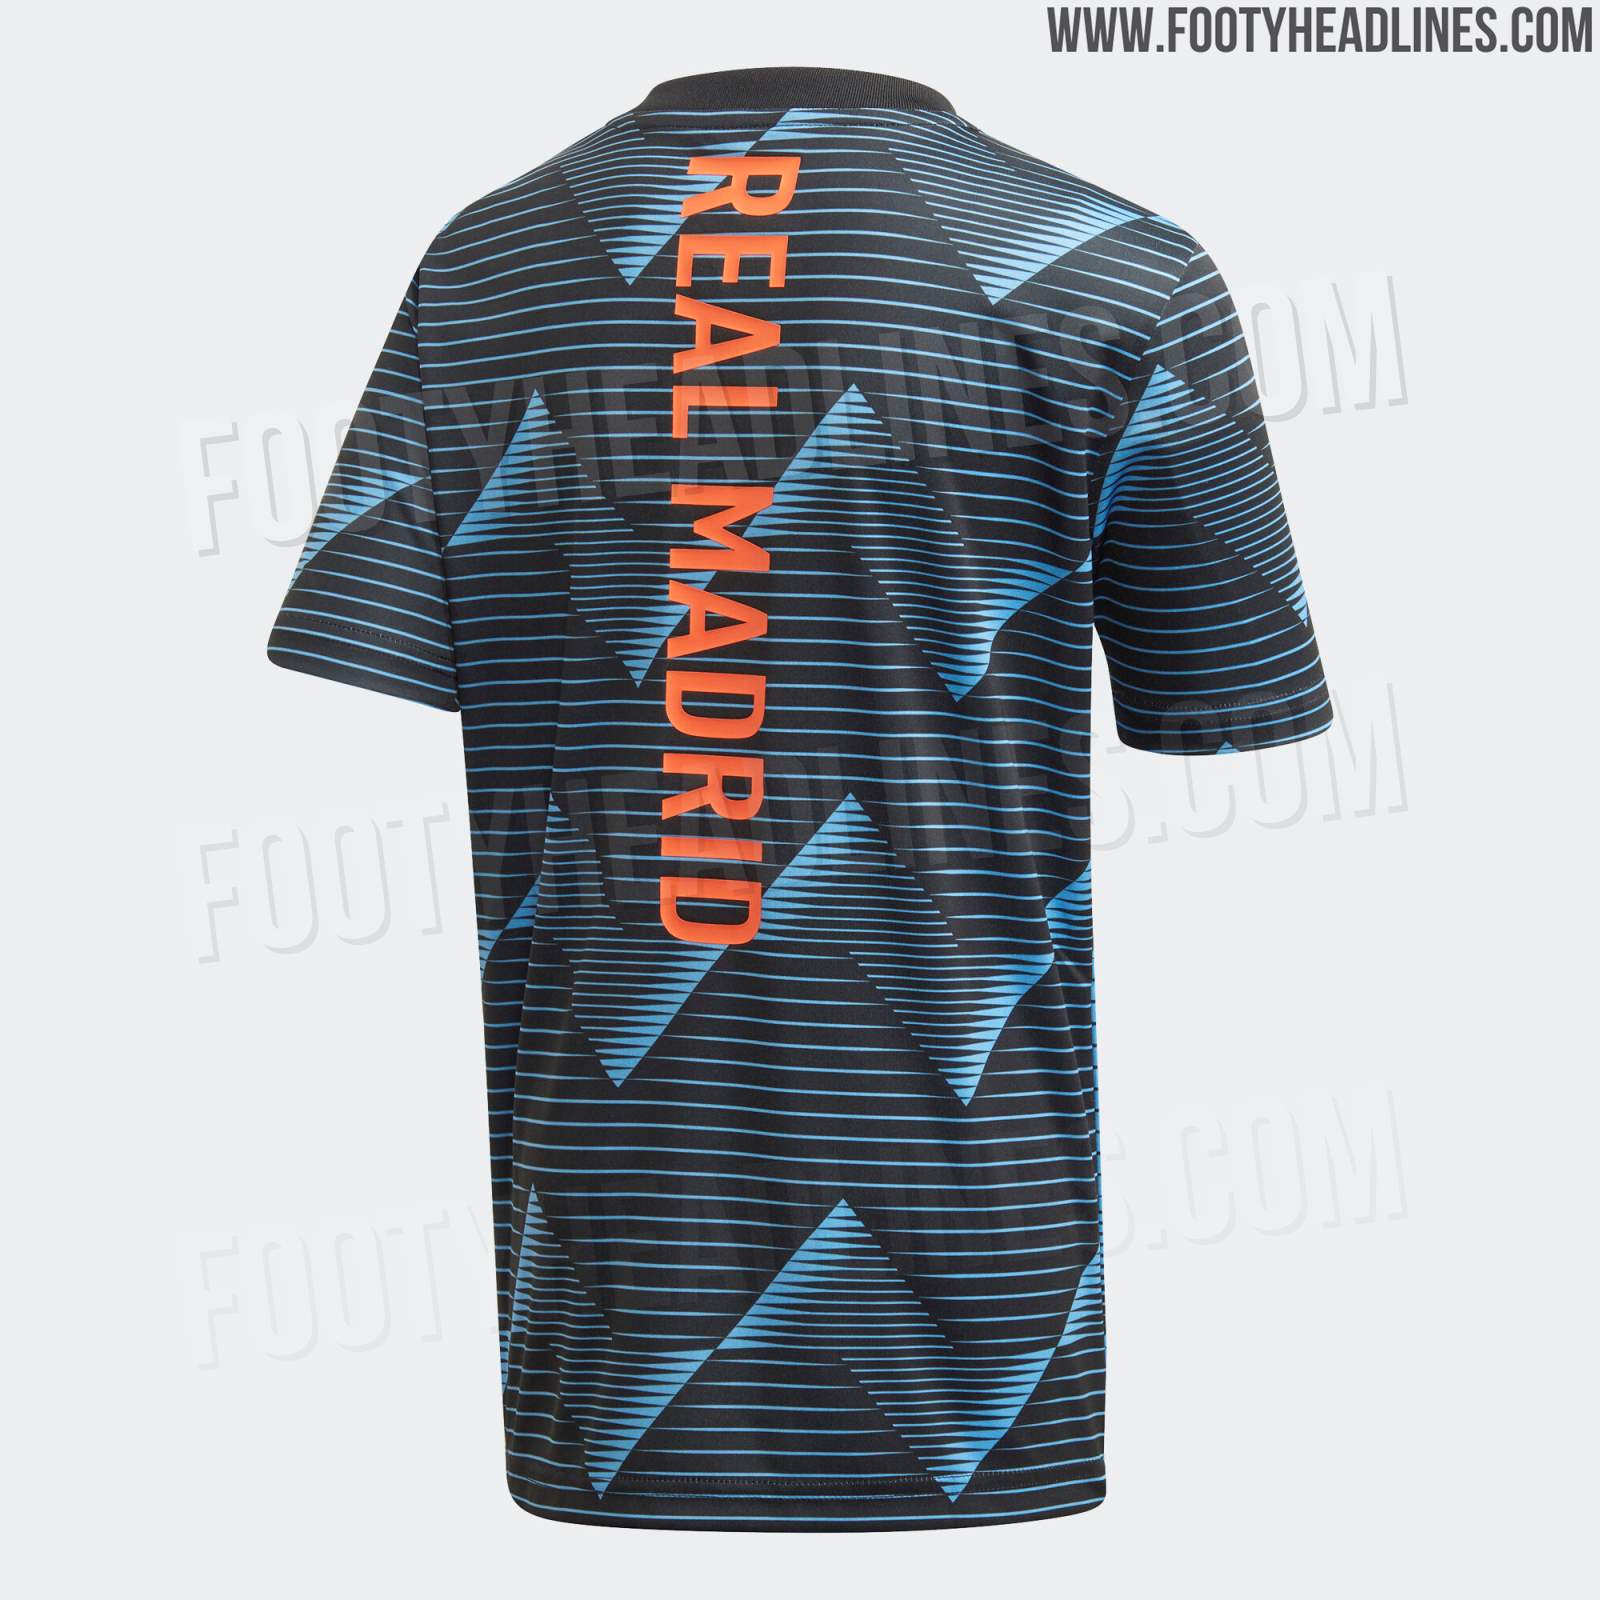 Real Madrid 2020 Pre-Match Shirt Leaked - Footy Headlines